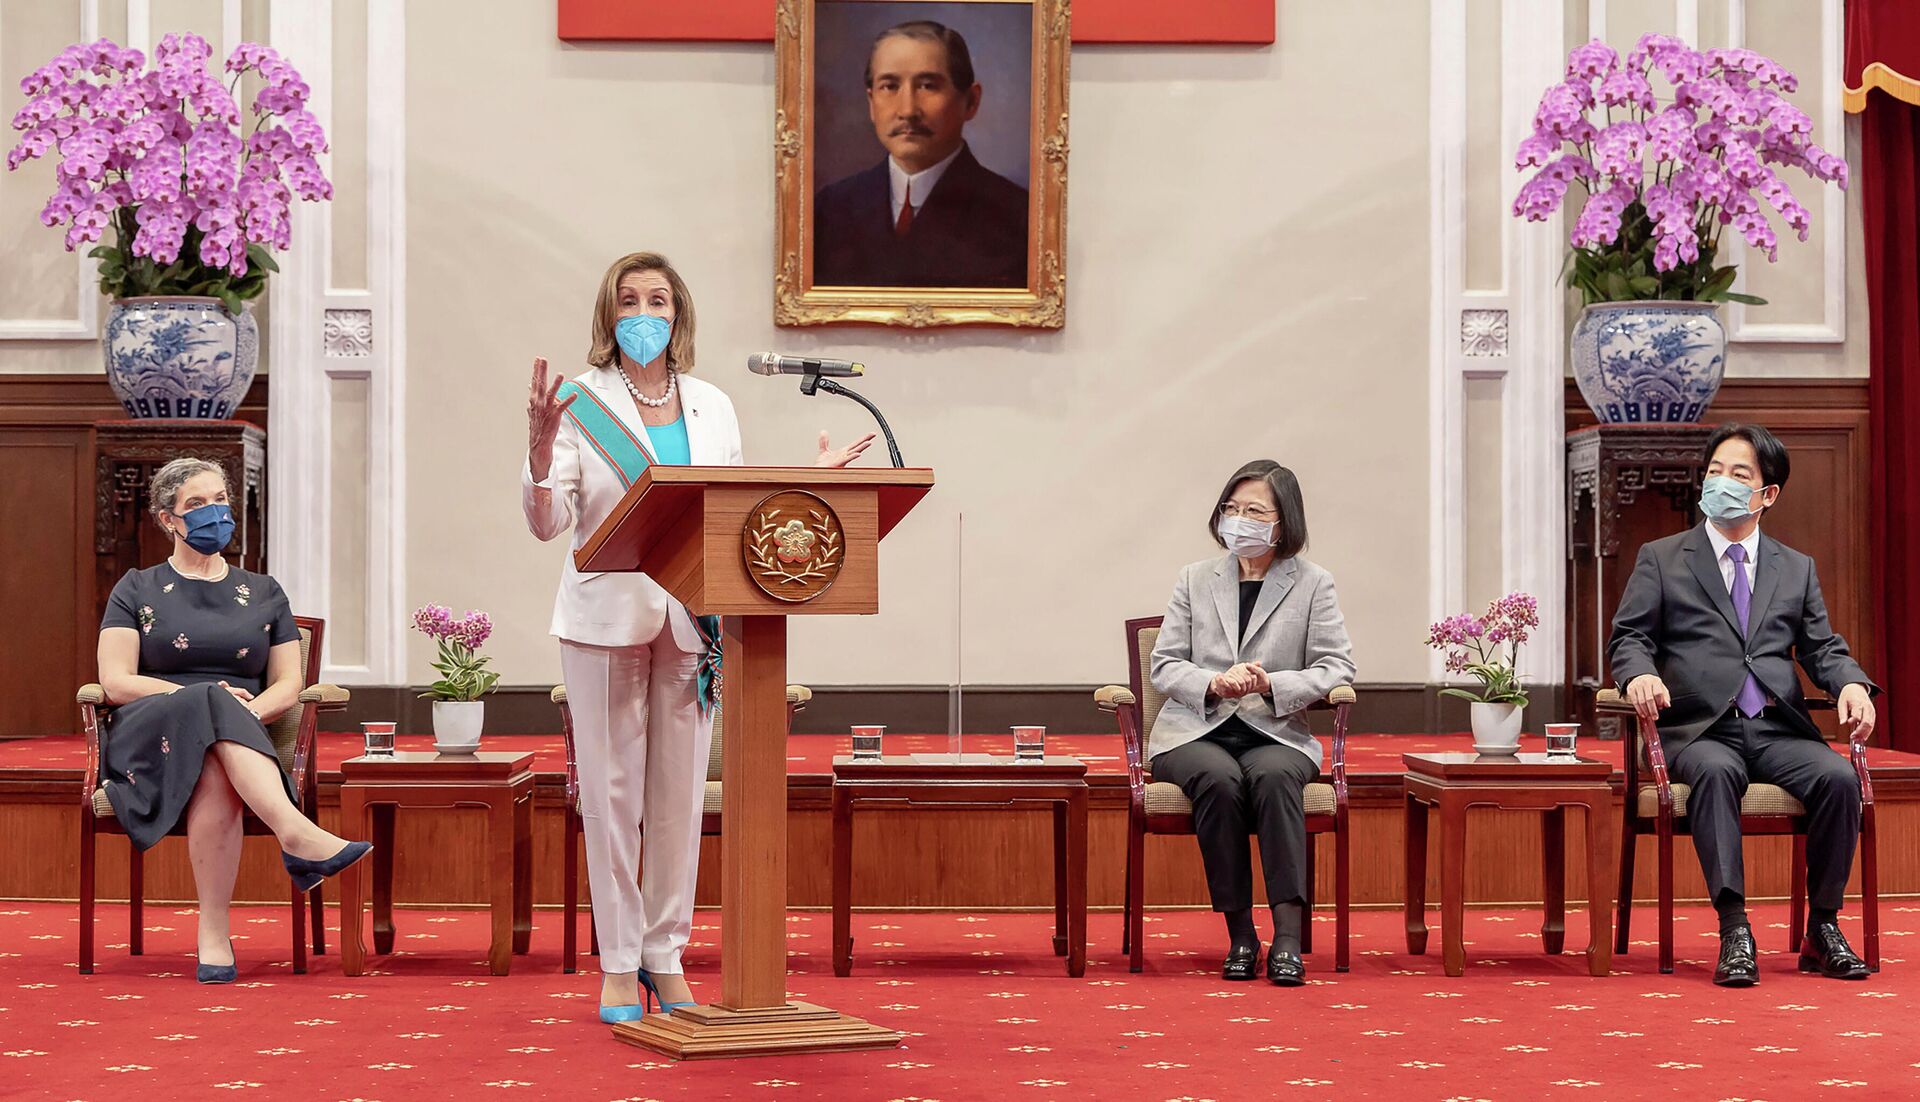 In this photo released by the Taiwan Presidential Office, U.S. House Speaker Nancy Pelosi speaks during a meeting with Taiwanese President President Tsai Ing-wen, second from right, in Taipei, Taiwan, Wednesday, Aug. 3, 2022 - Sputnik International, 1920, 15.08.2022